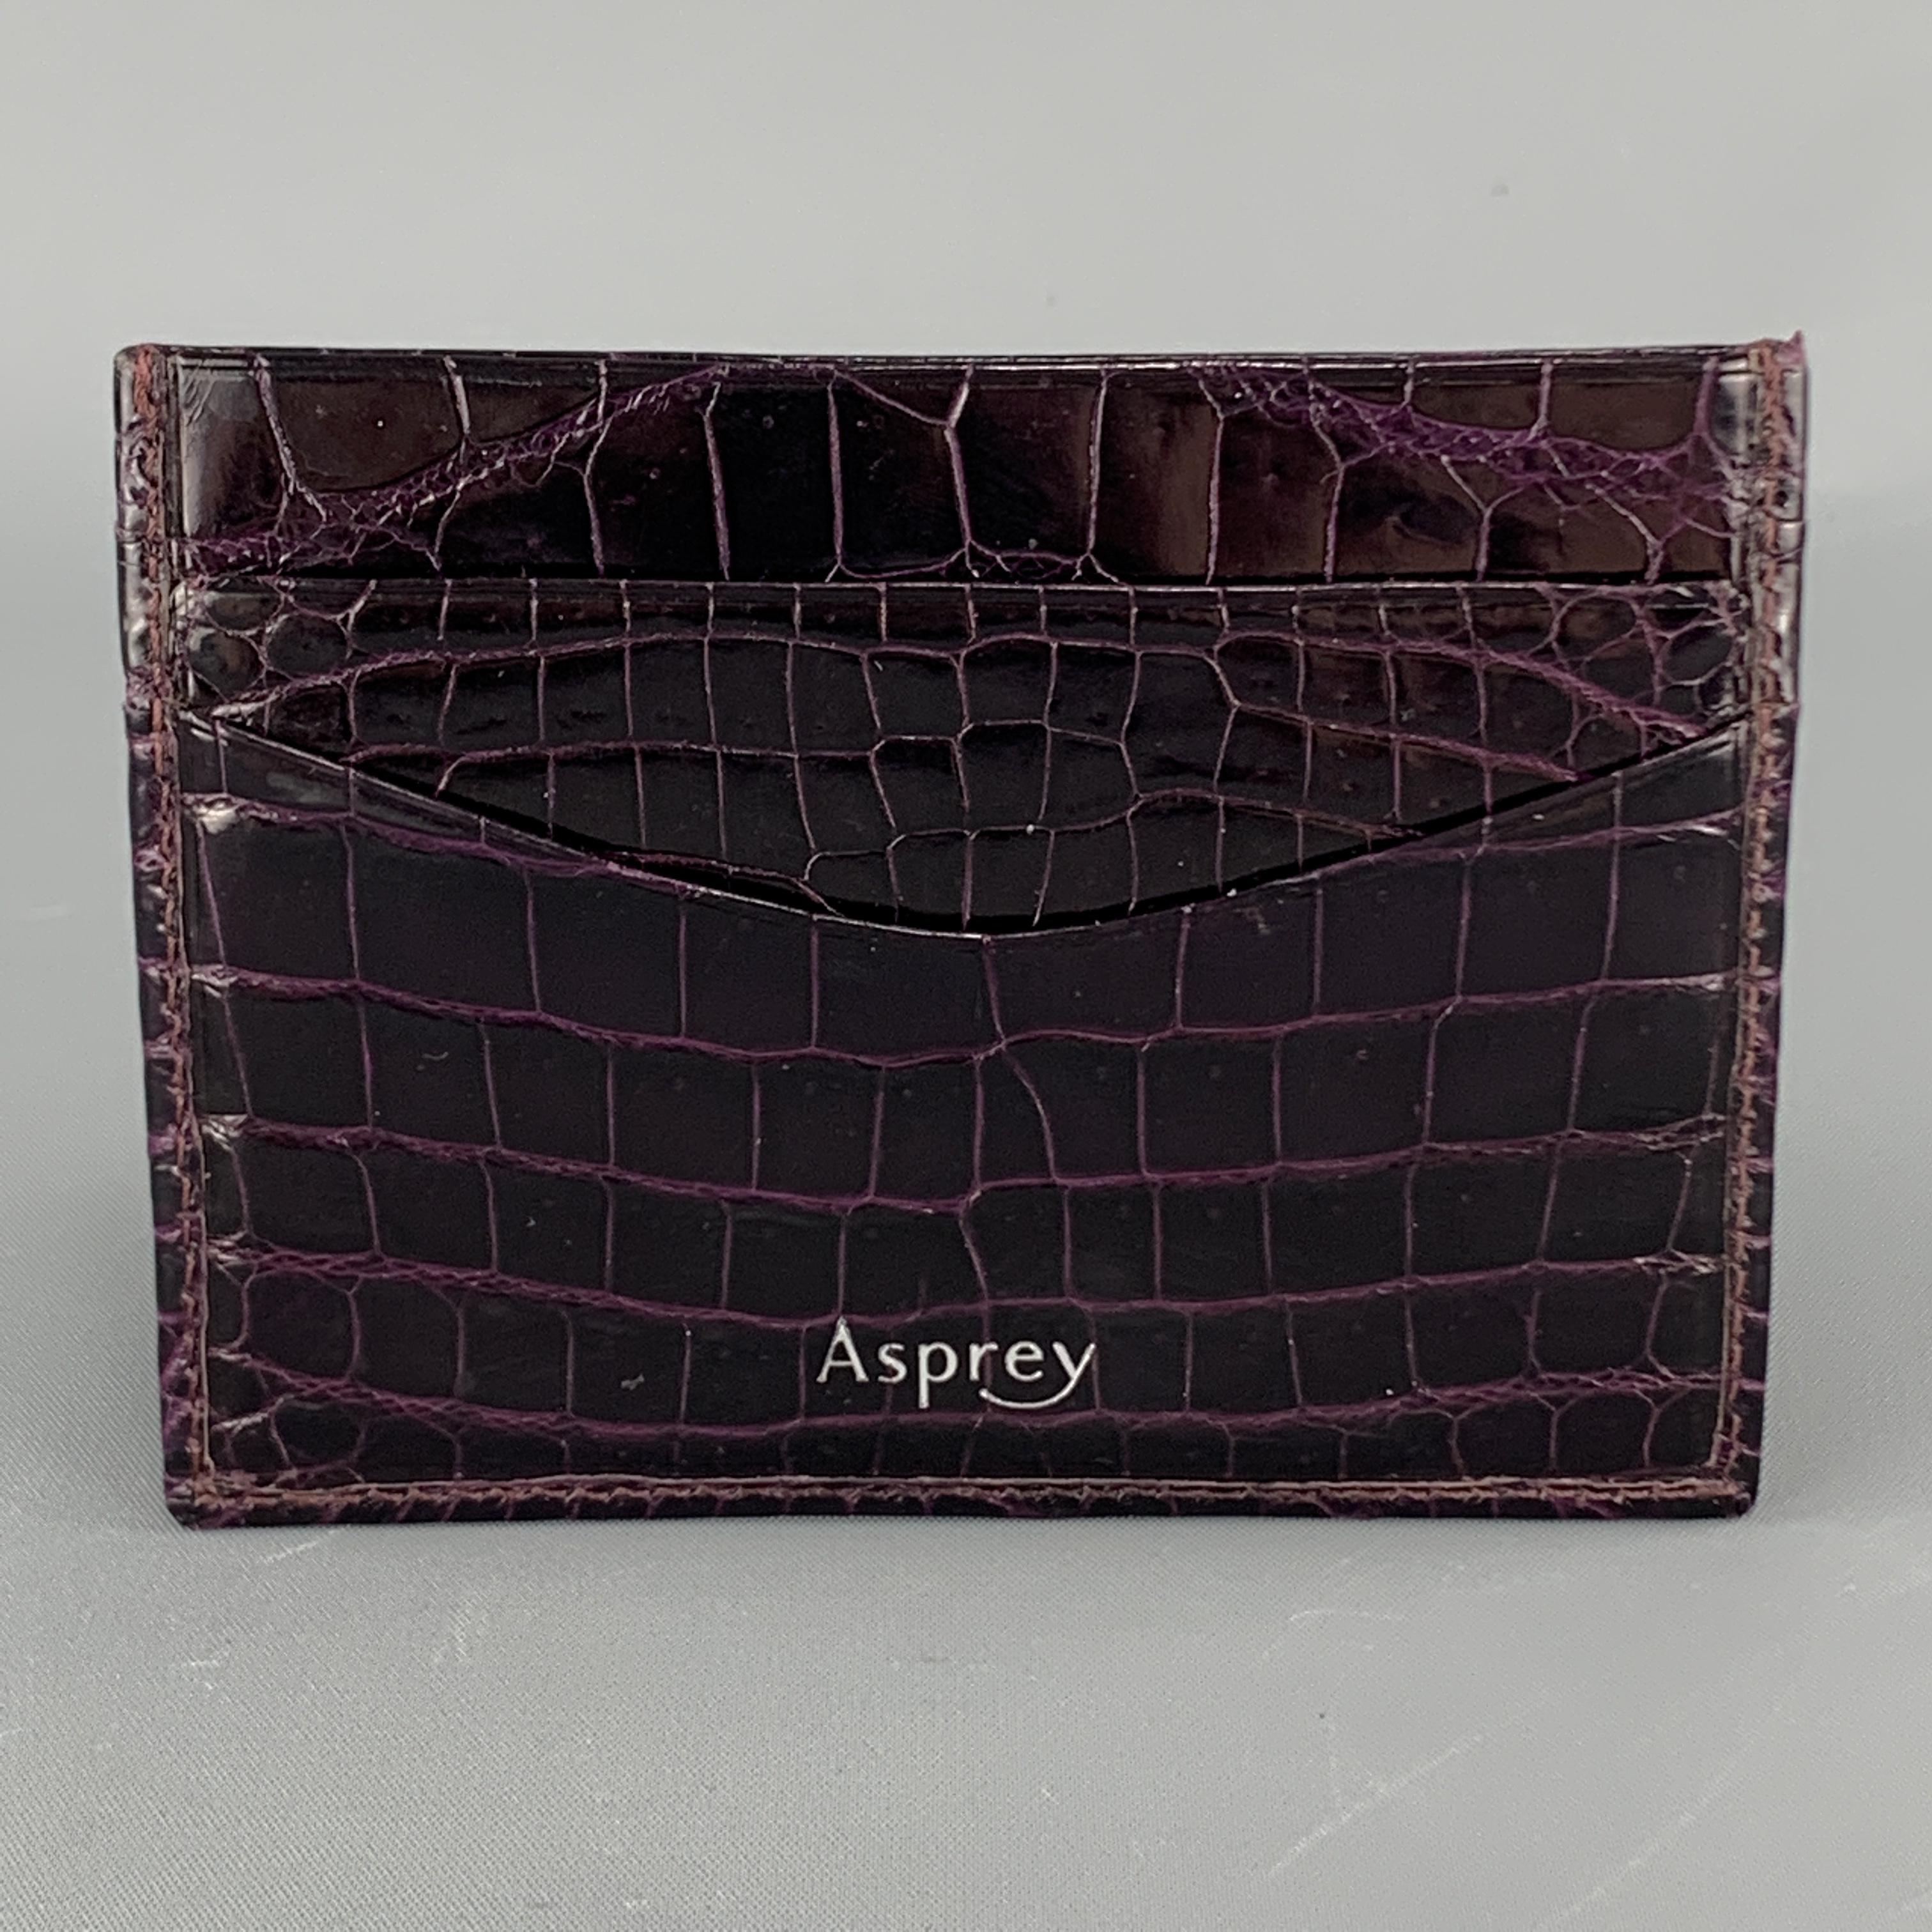 ASPREY card case comes in rich eggplant purple alligator embossed patent leather with inner and outter card slots. 

Excellent Pre-Owned Condition.
4.5 x 3.25 in. 